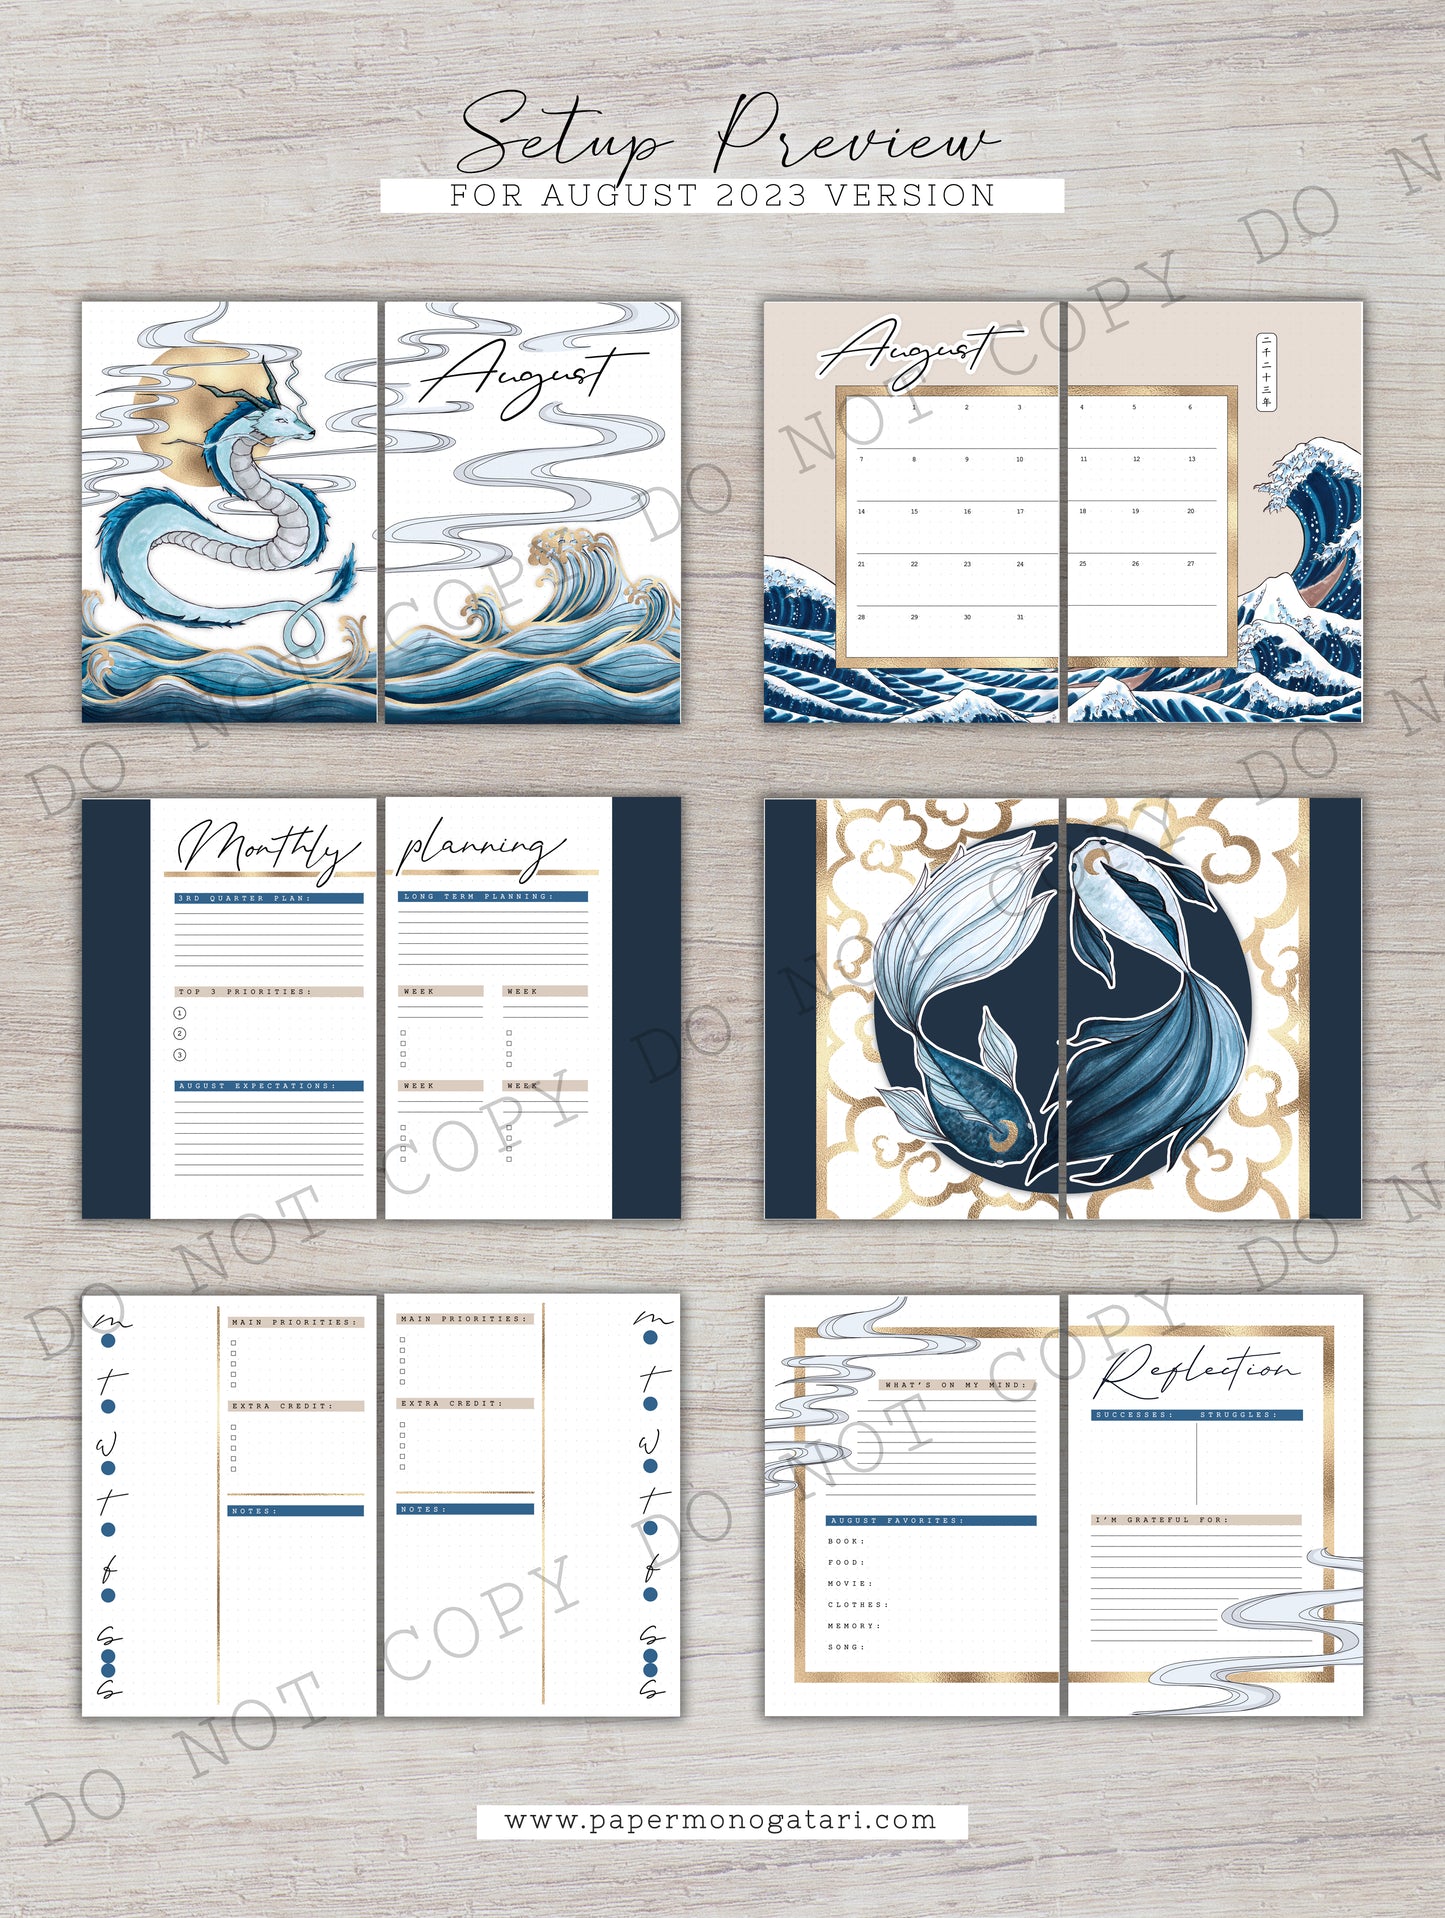 The Great Waves | Digital Bullet Journal Theme